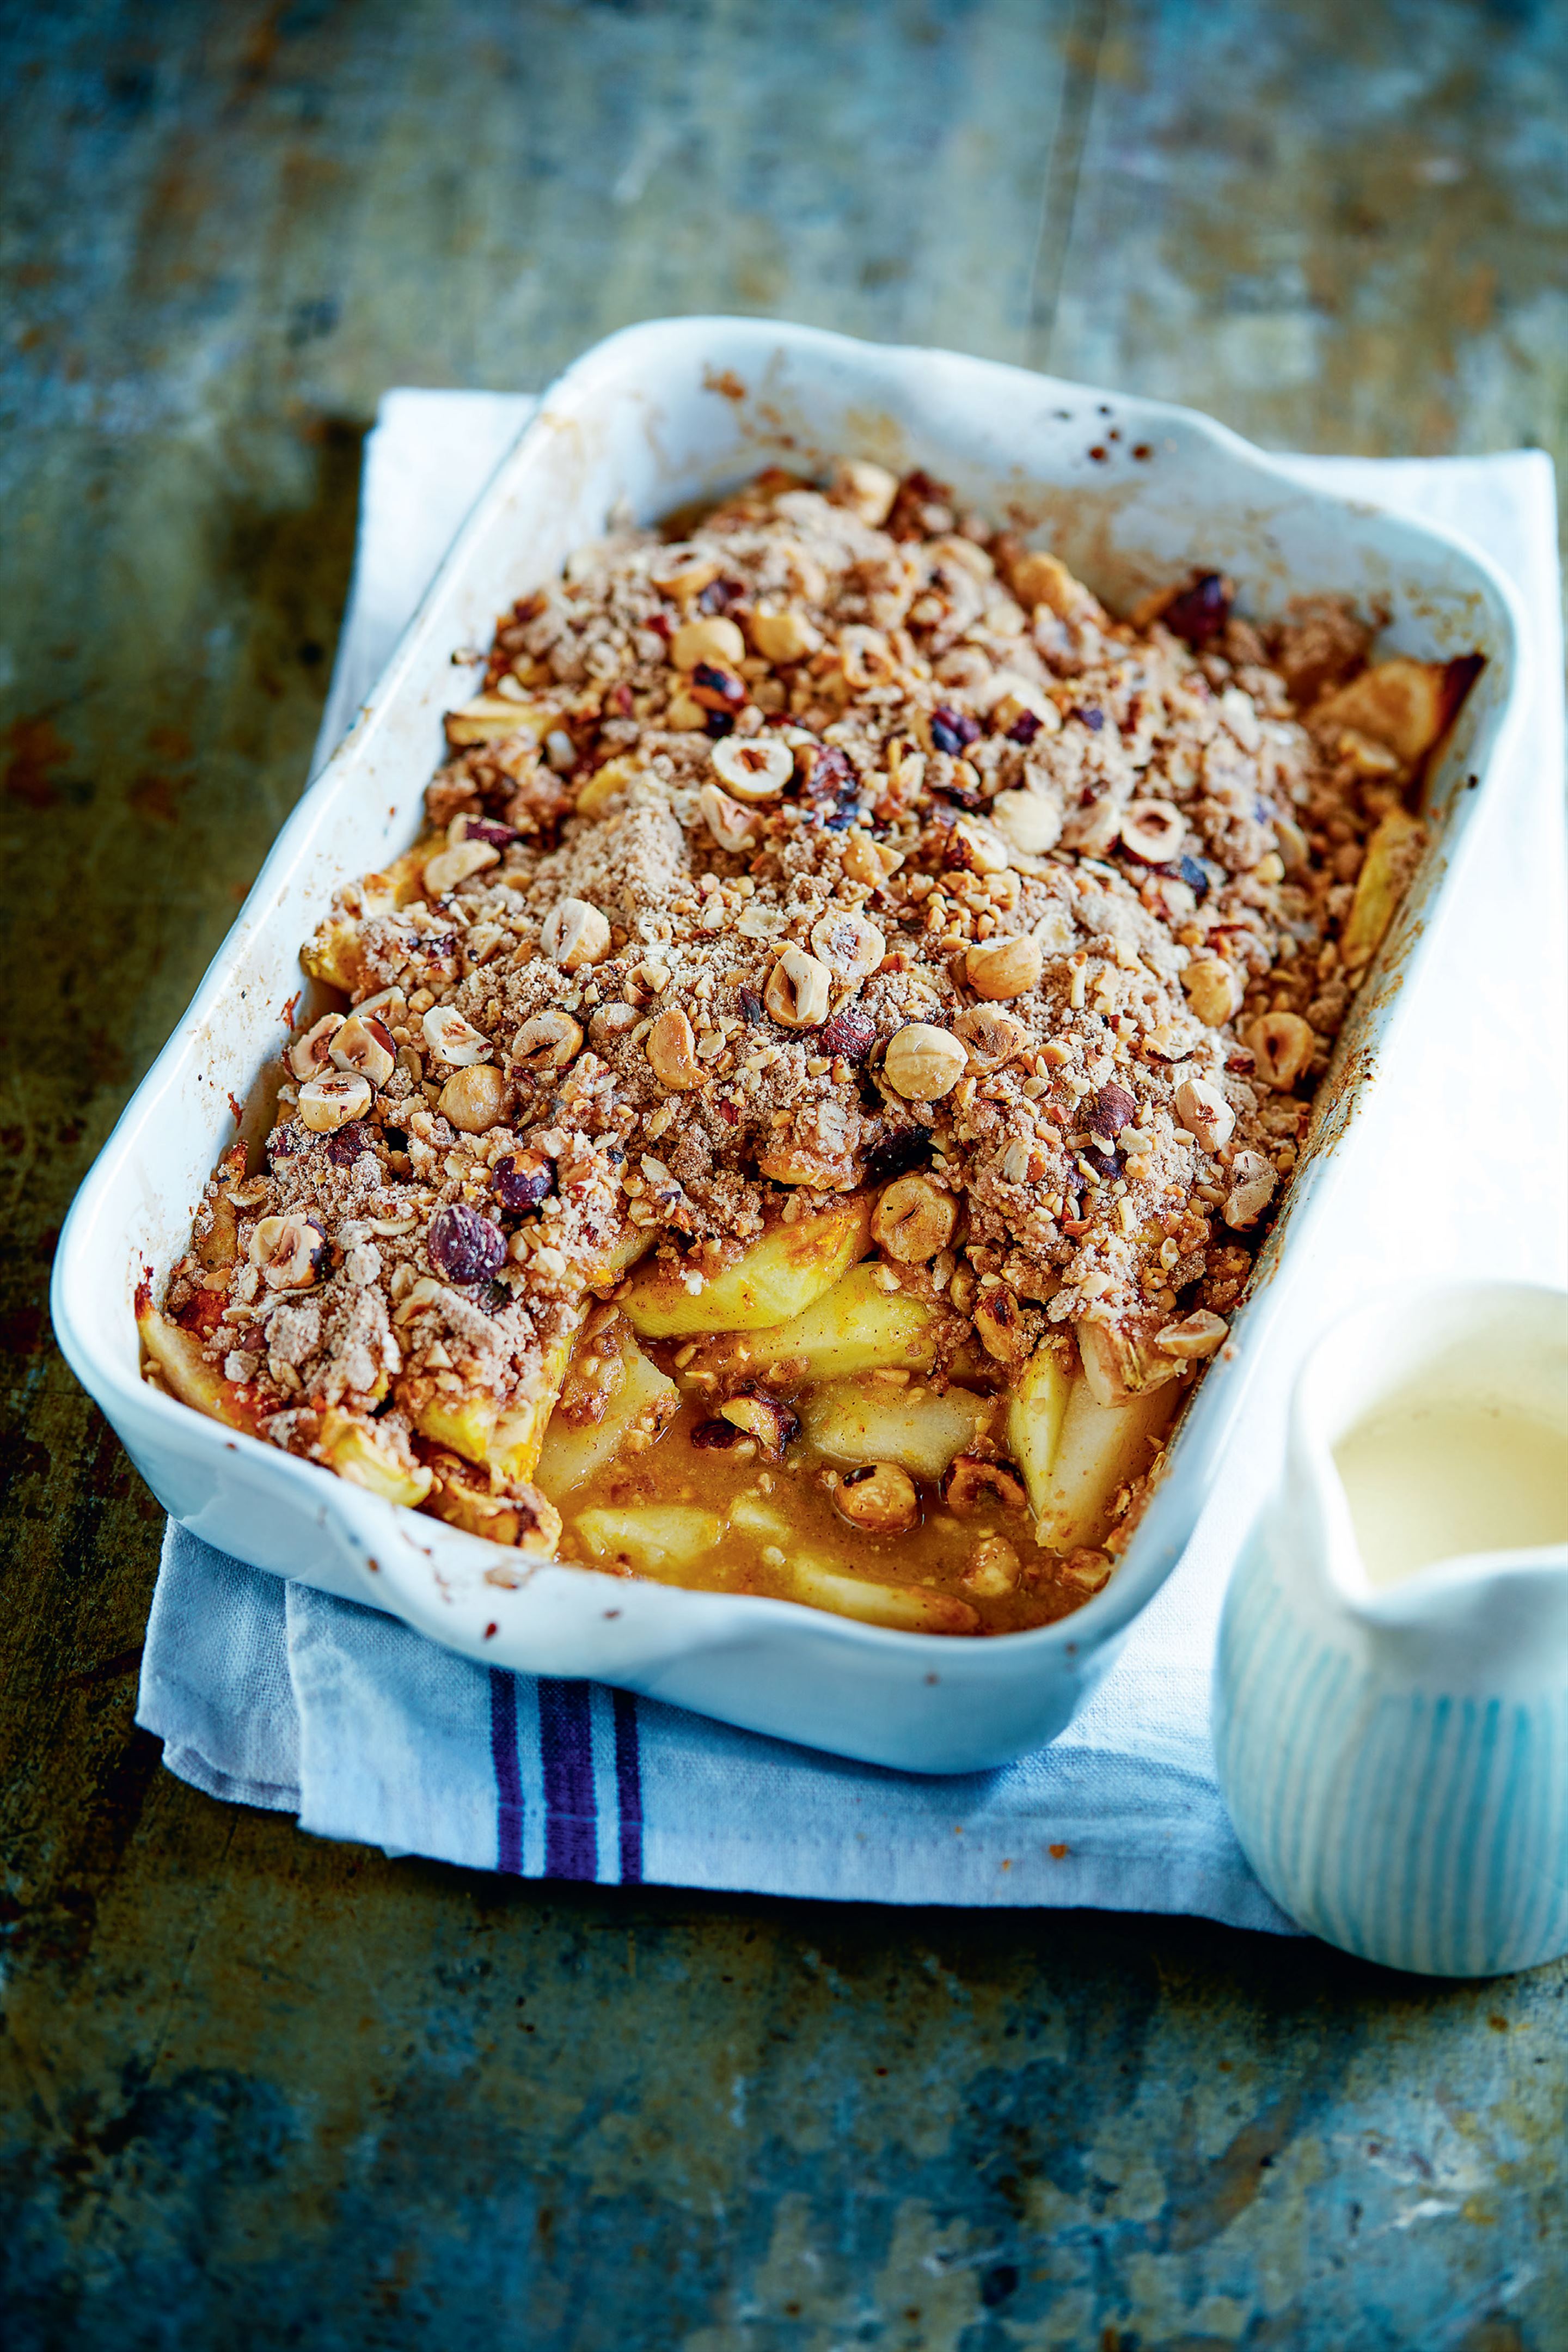 Hazelnut, apple and pear crumble